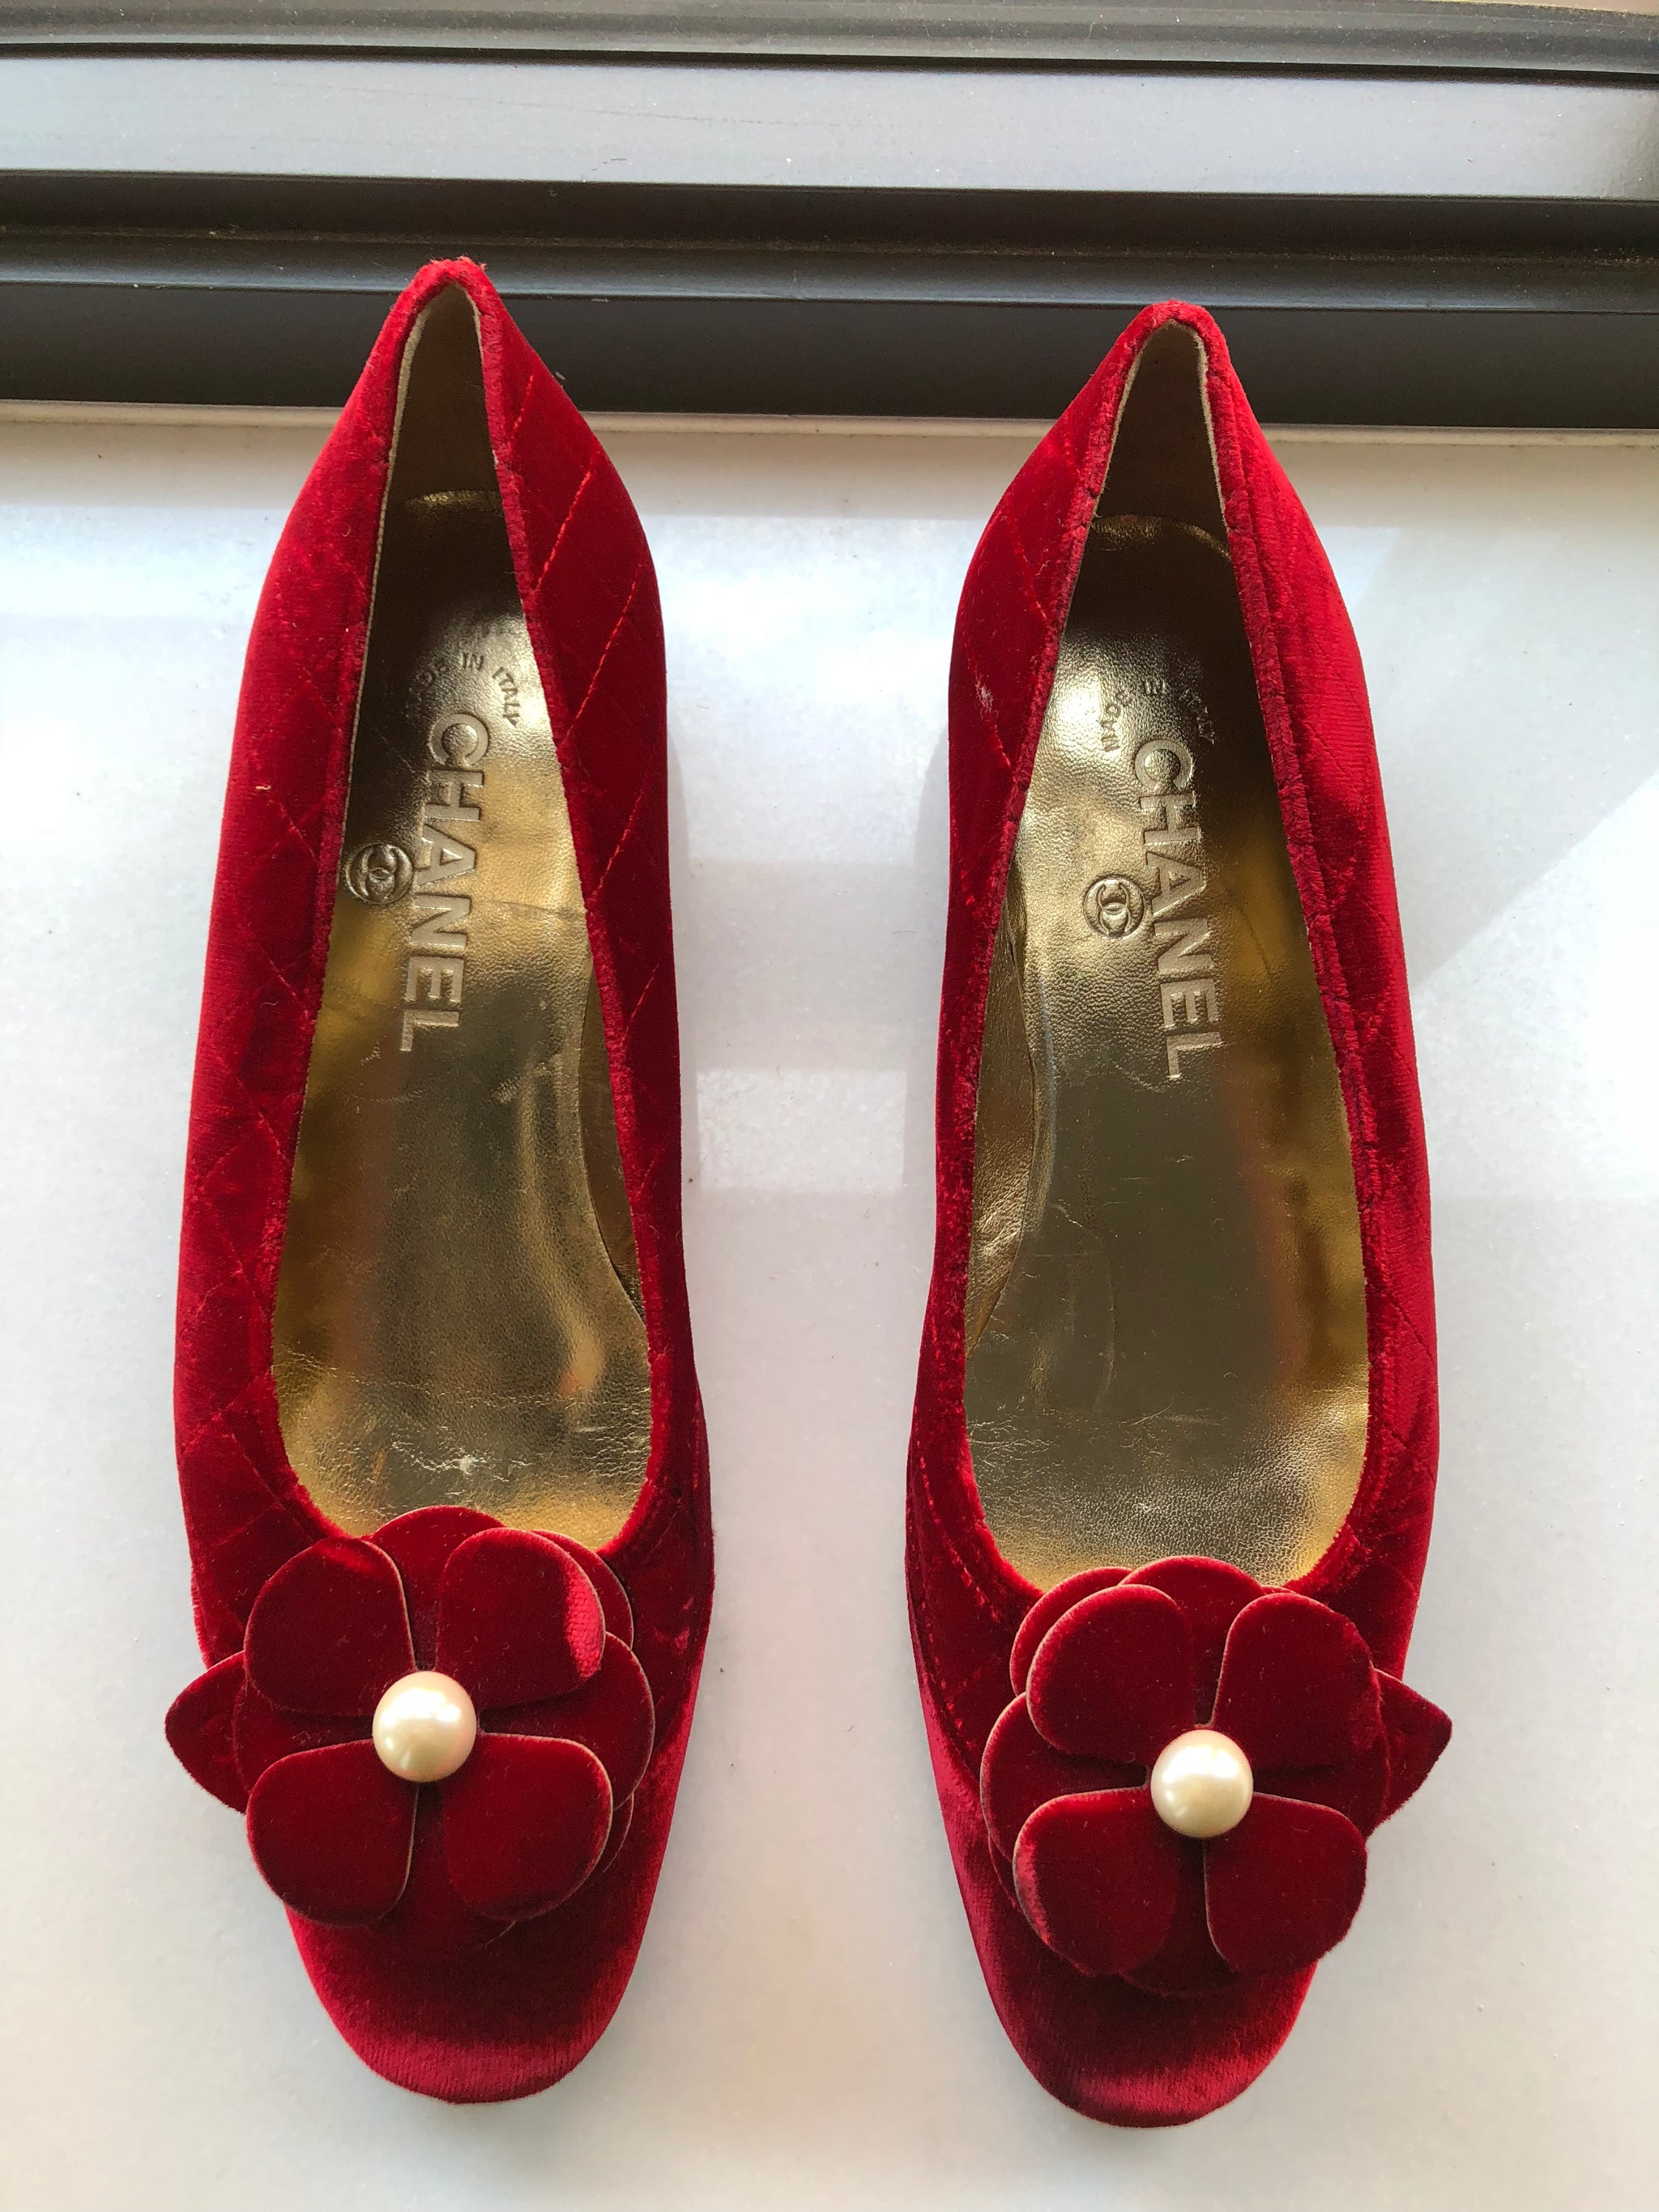 Vintage Chanel Shoes! - New Neu Glamour  Preloved Designer Jewelry, Shoes  & Handbags.